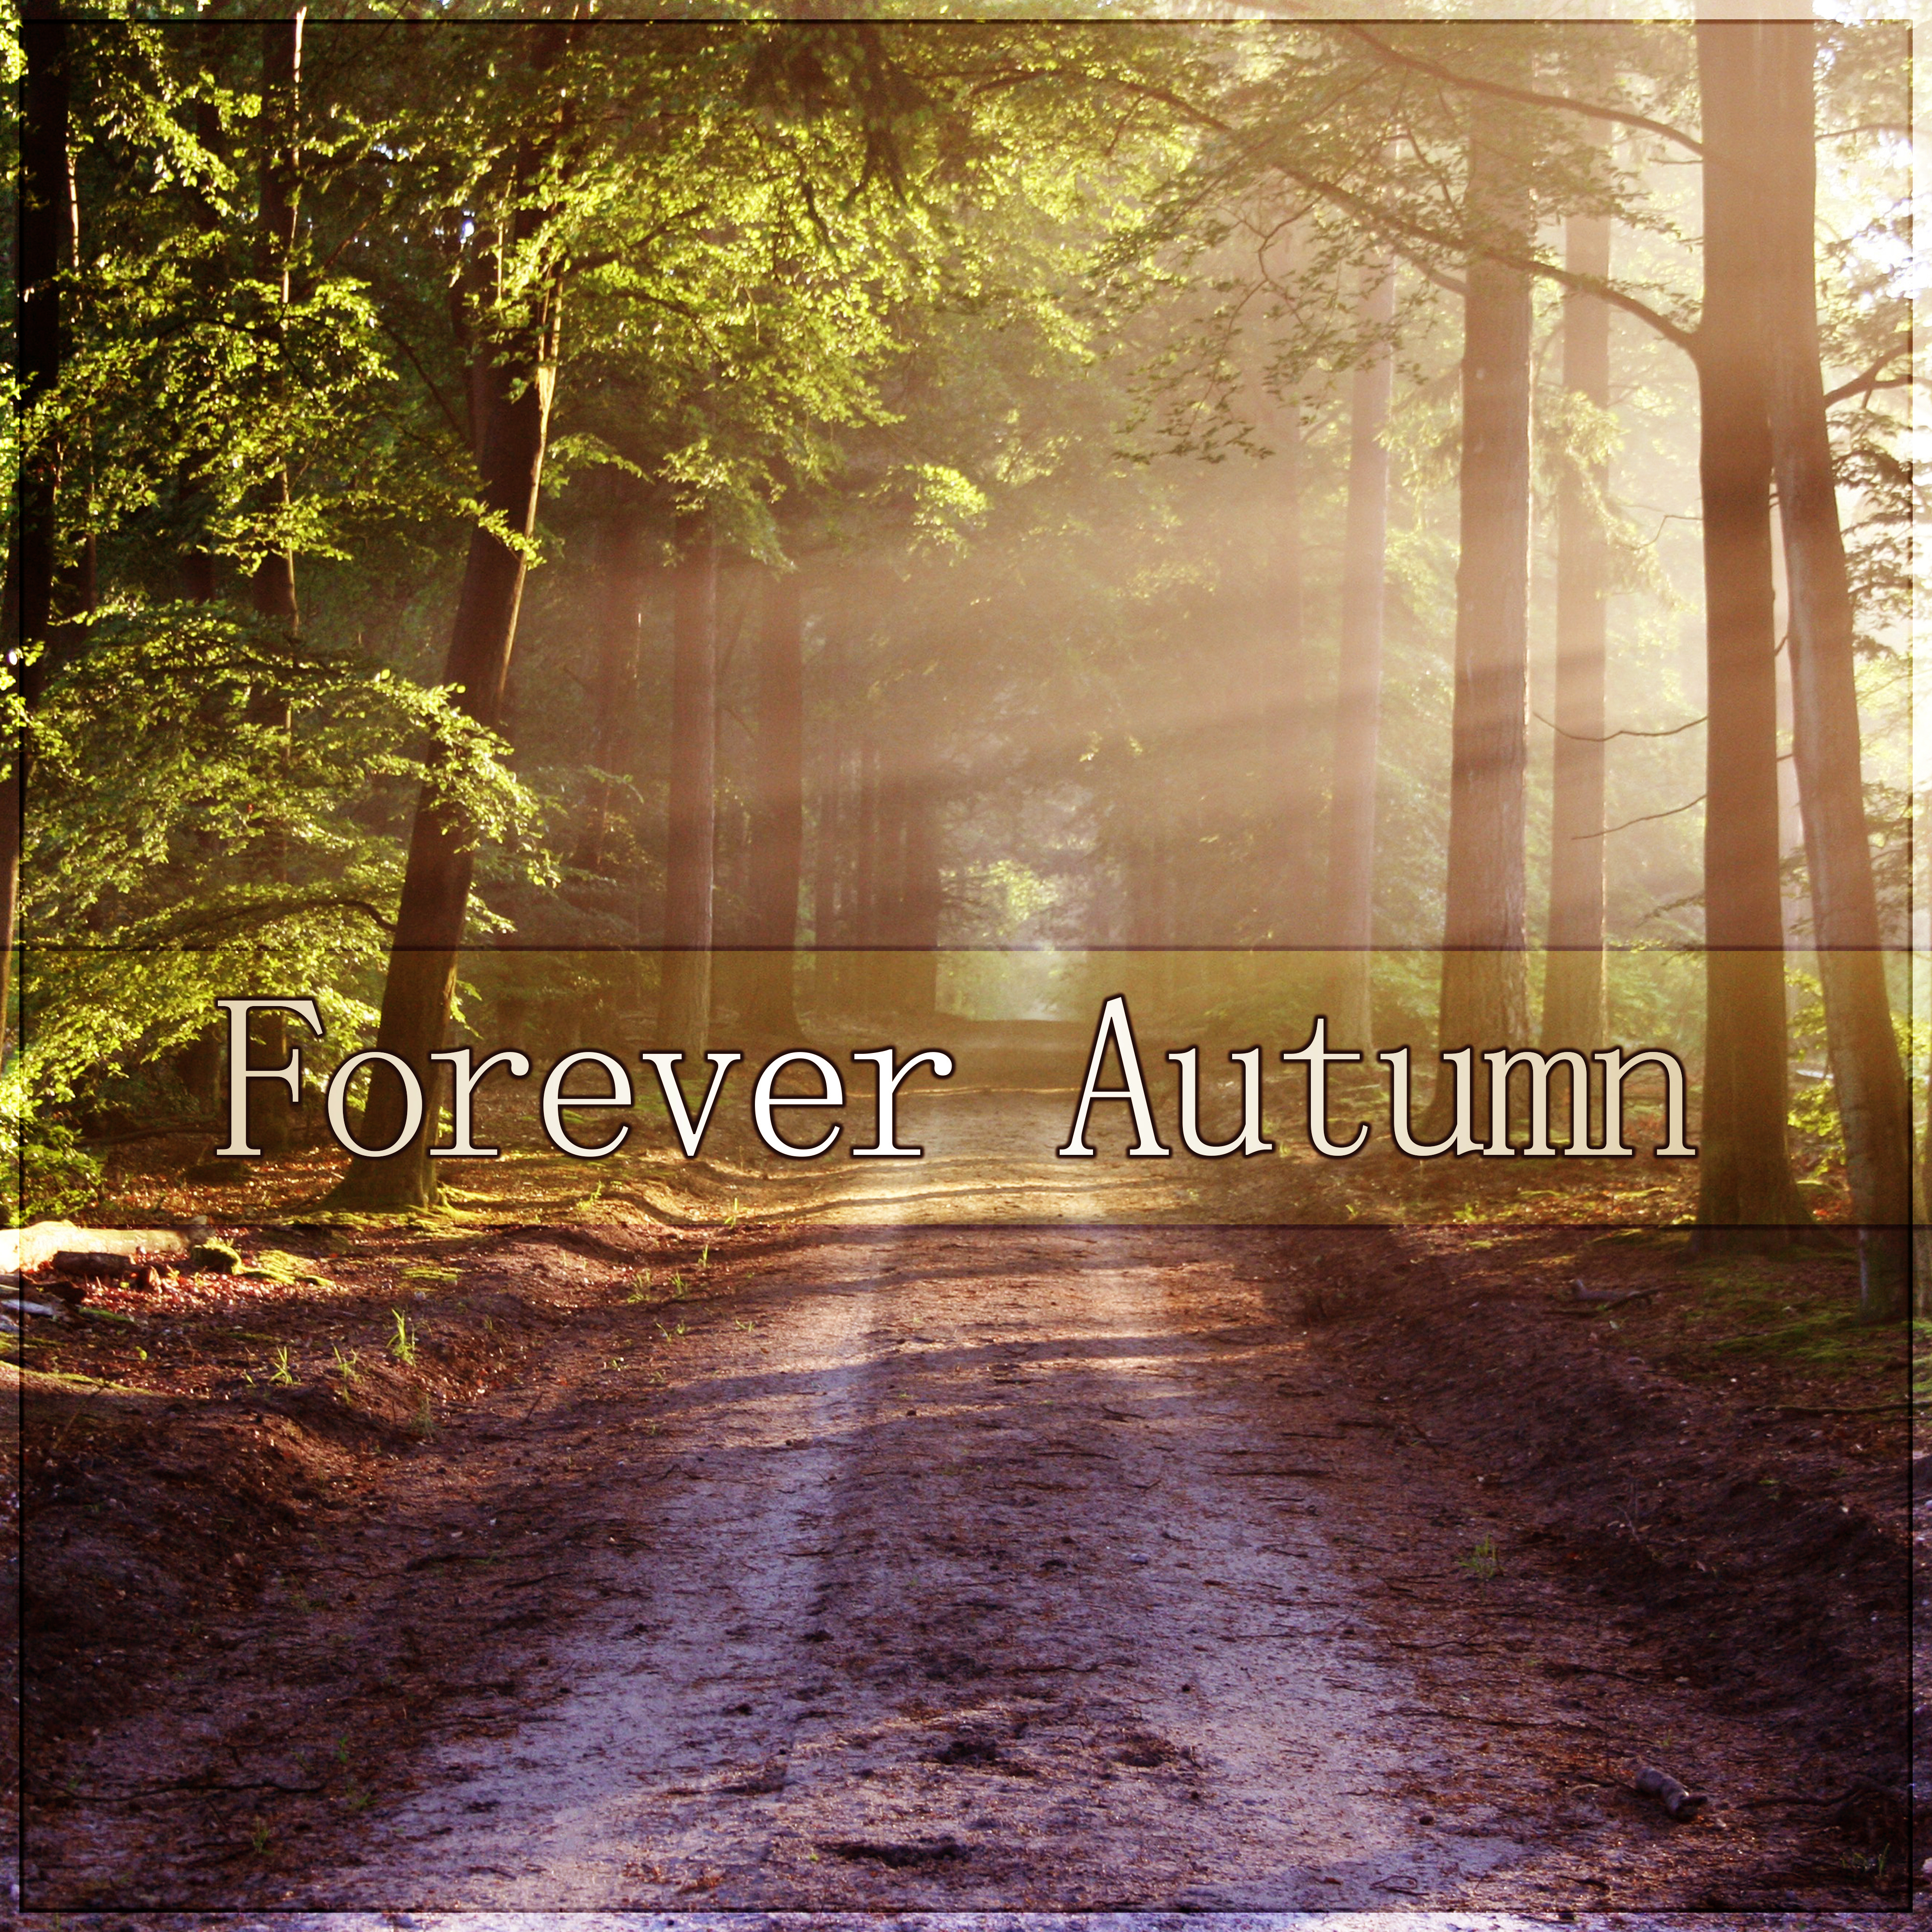 Forever Autumn  - Good Day with Relaxing Sounds & Sounds of Nature, Calm Background Music for Reduce Stress the Body & Mind, Wake Up, Positive Attitude to the World, Morning Coffee, Yoga